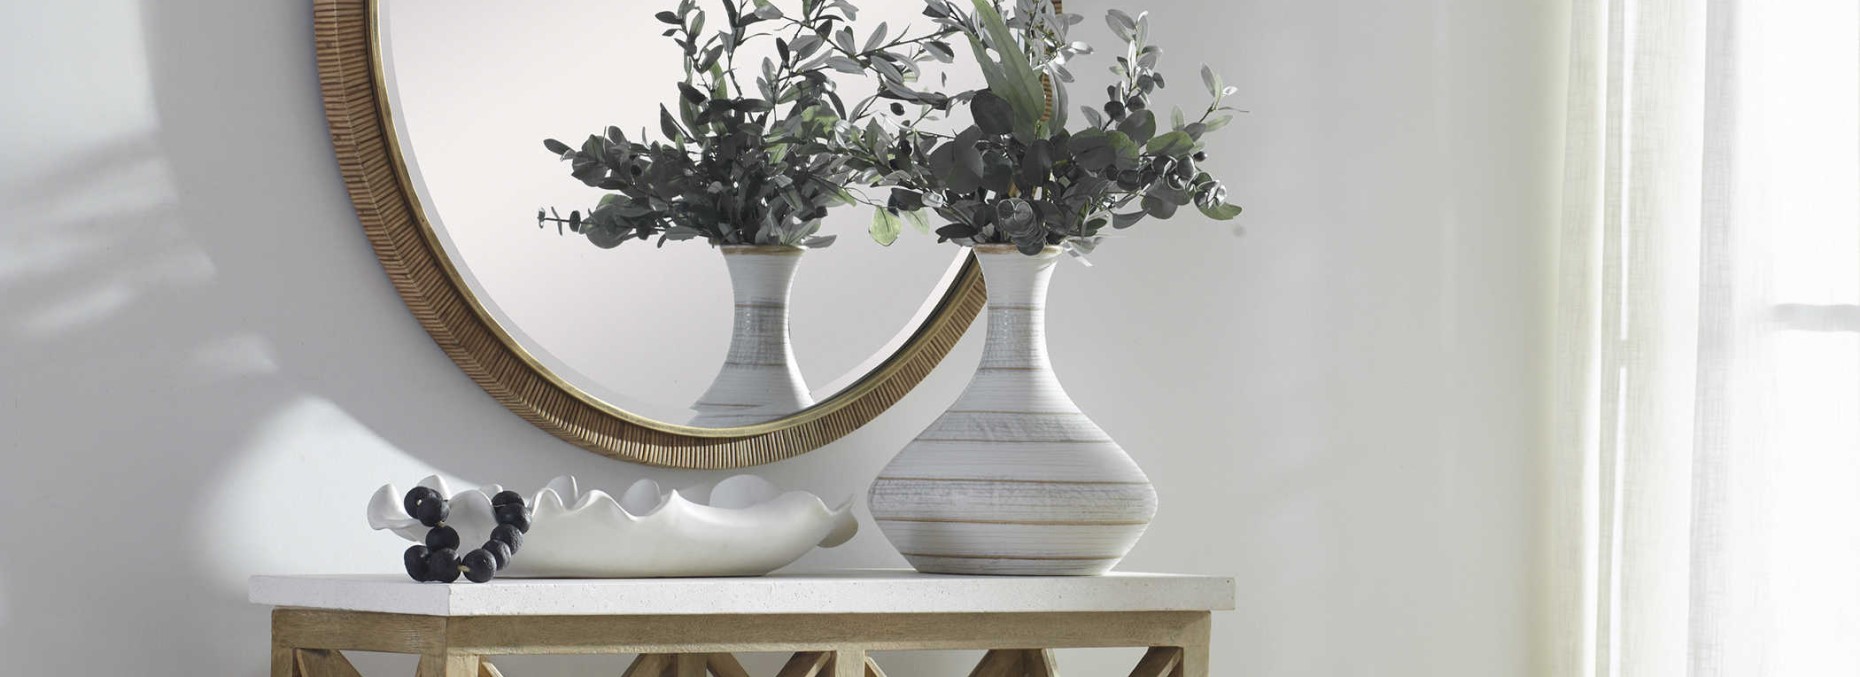 Ruffled Feather bowl and Potter vase by Uttermost